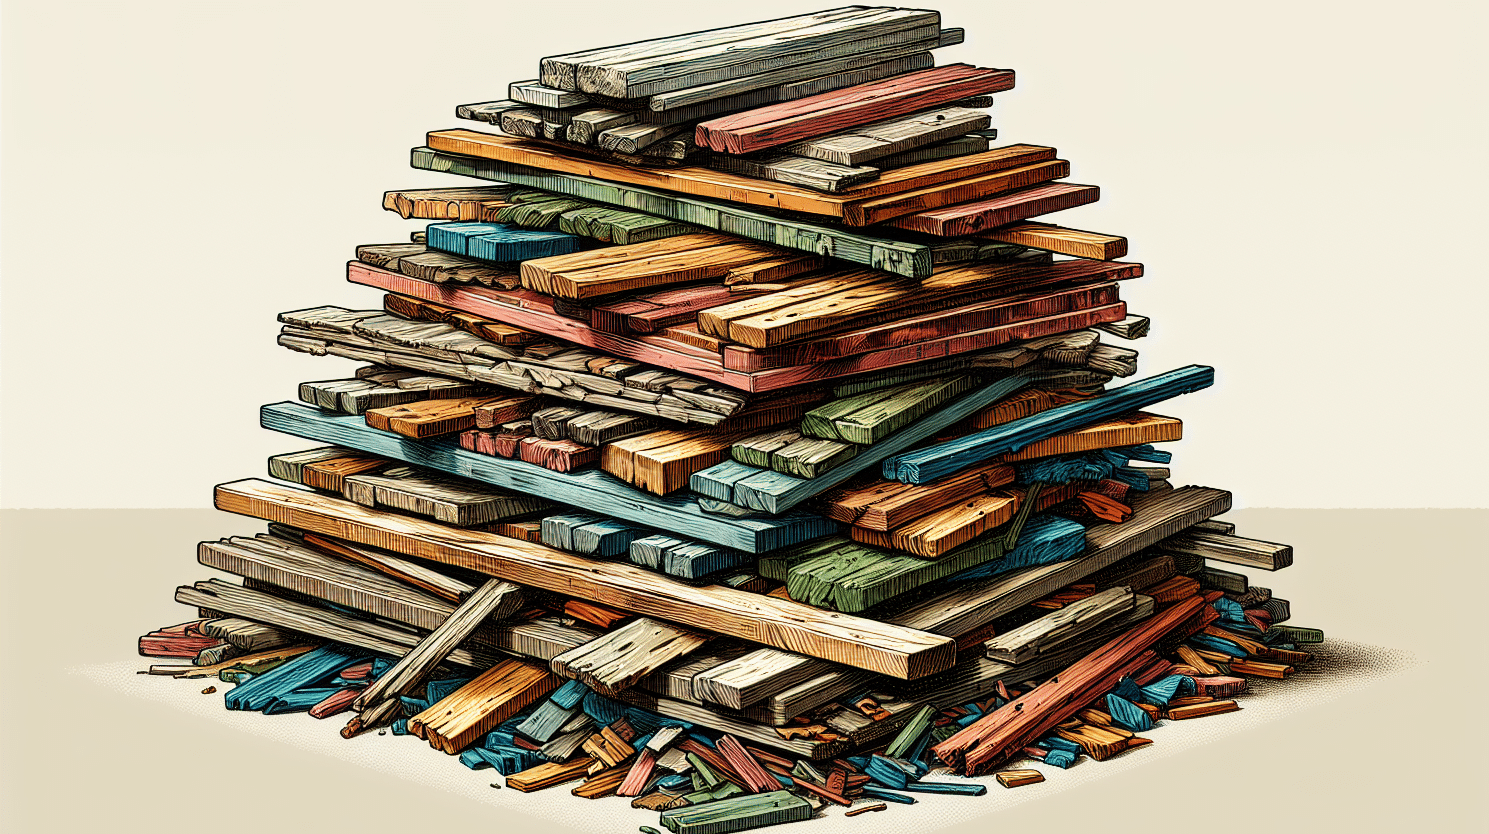 Illustration of a pile of recycled building materials